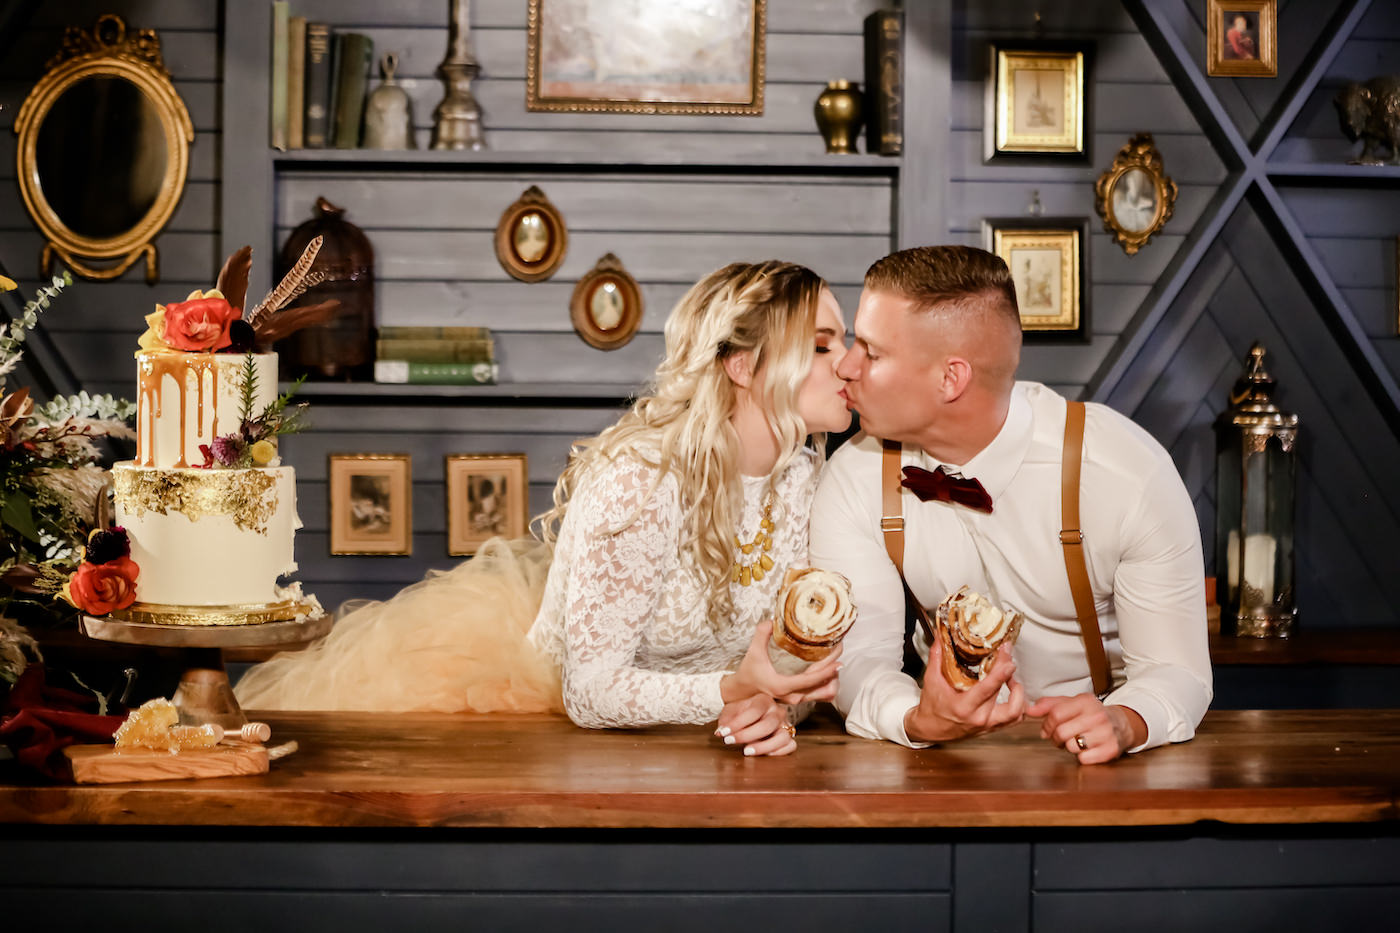 Florida Bride and Groom Kiss During Cake Cutting, Eating Bear Claws, Boho Inspired Bride Wearing Lace Long Sleeve Shirt with Blush Orange Tulle Skirt, Groom in Suspenders with Velvet Bowtie, Two Tier Bohemian Themed White Buttercream Wedding Cake with Honey Drip Icing, Edible Gold Glitter Detailing, with Autumn Florals, Deep Red Roses, Purple Thistle, Eggplant Florals, White and Gold Flowers, Greenery and Pampas Grass | Florida Wedding Cake Artist The Artistic Whisk | Downtown St. Petersburg Wedding Planner Blue Skies Weddings and Events | Florida Wedding Photographer Lifelong Photography Studio | Tampa Bay Unique Wedding Venue Station House in DTSP